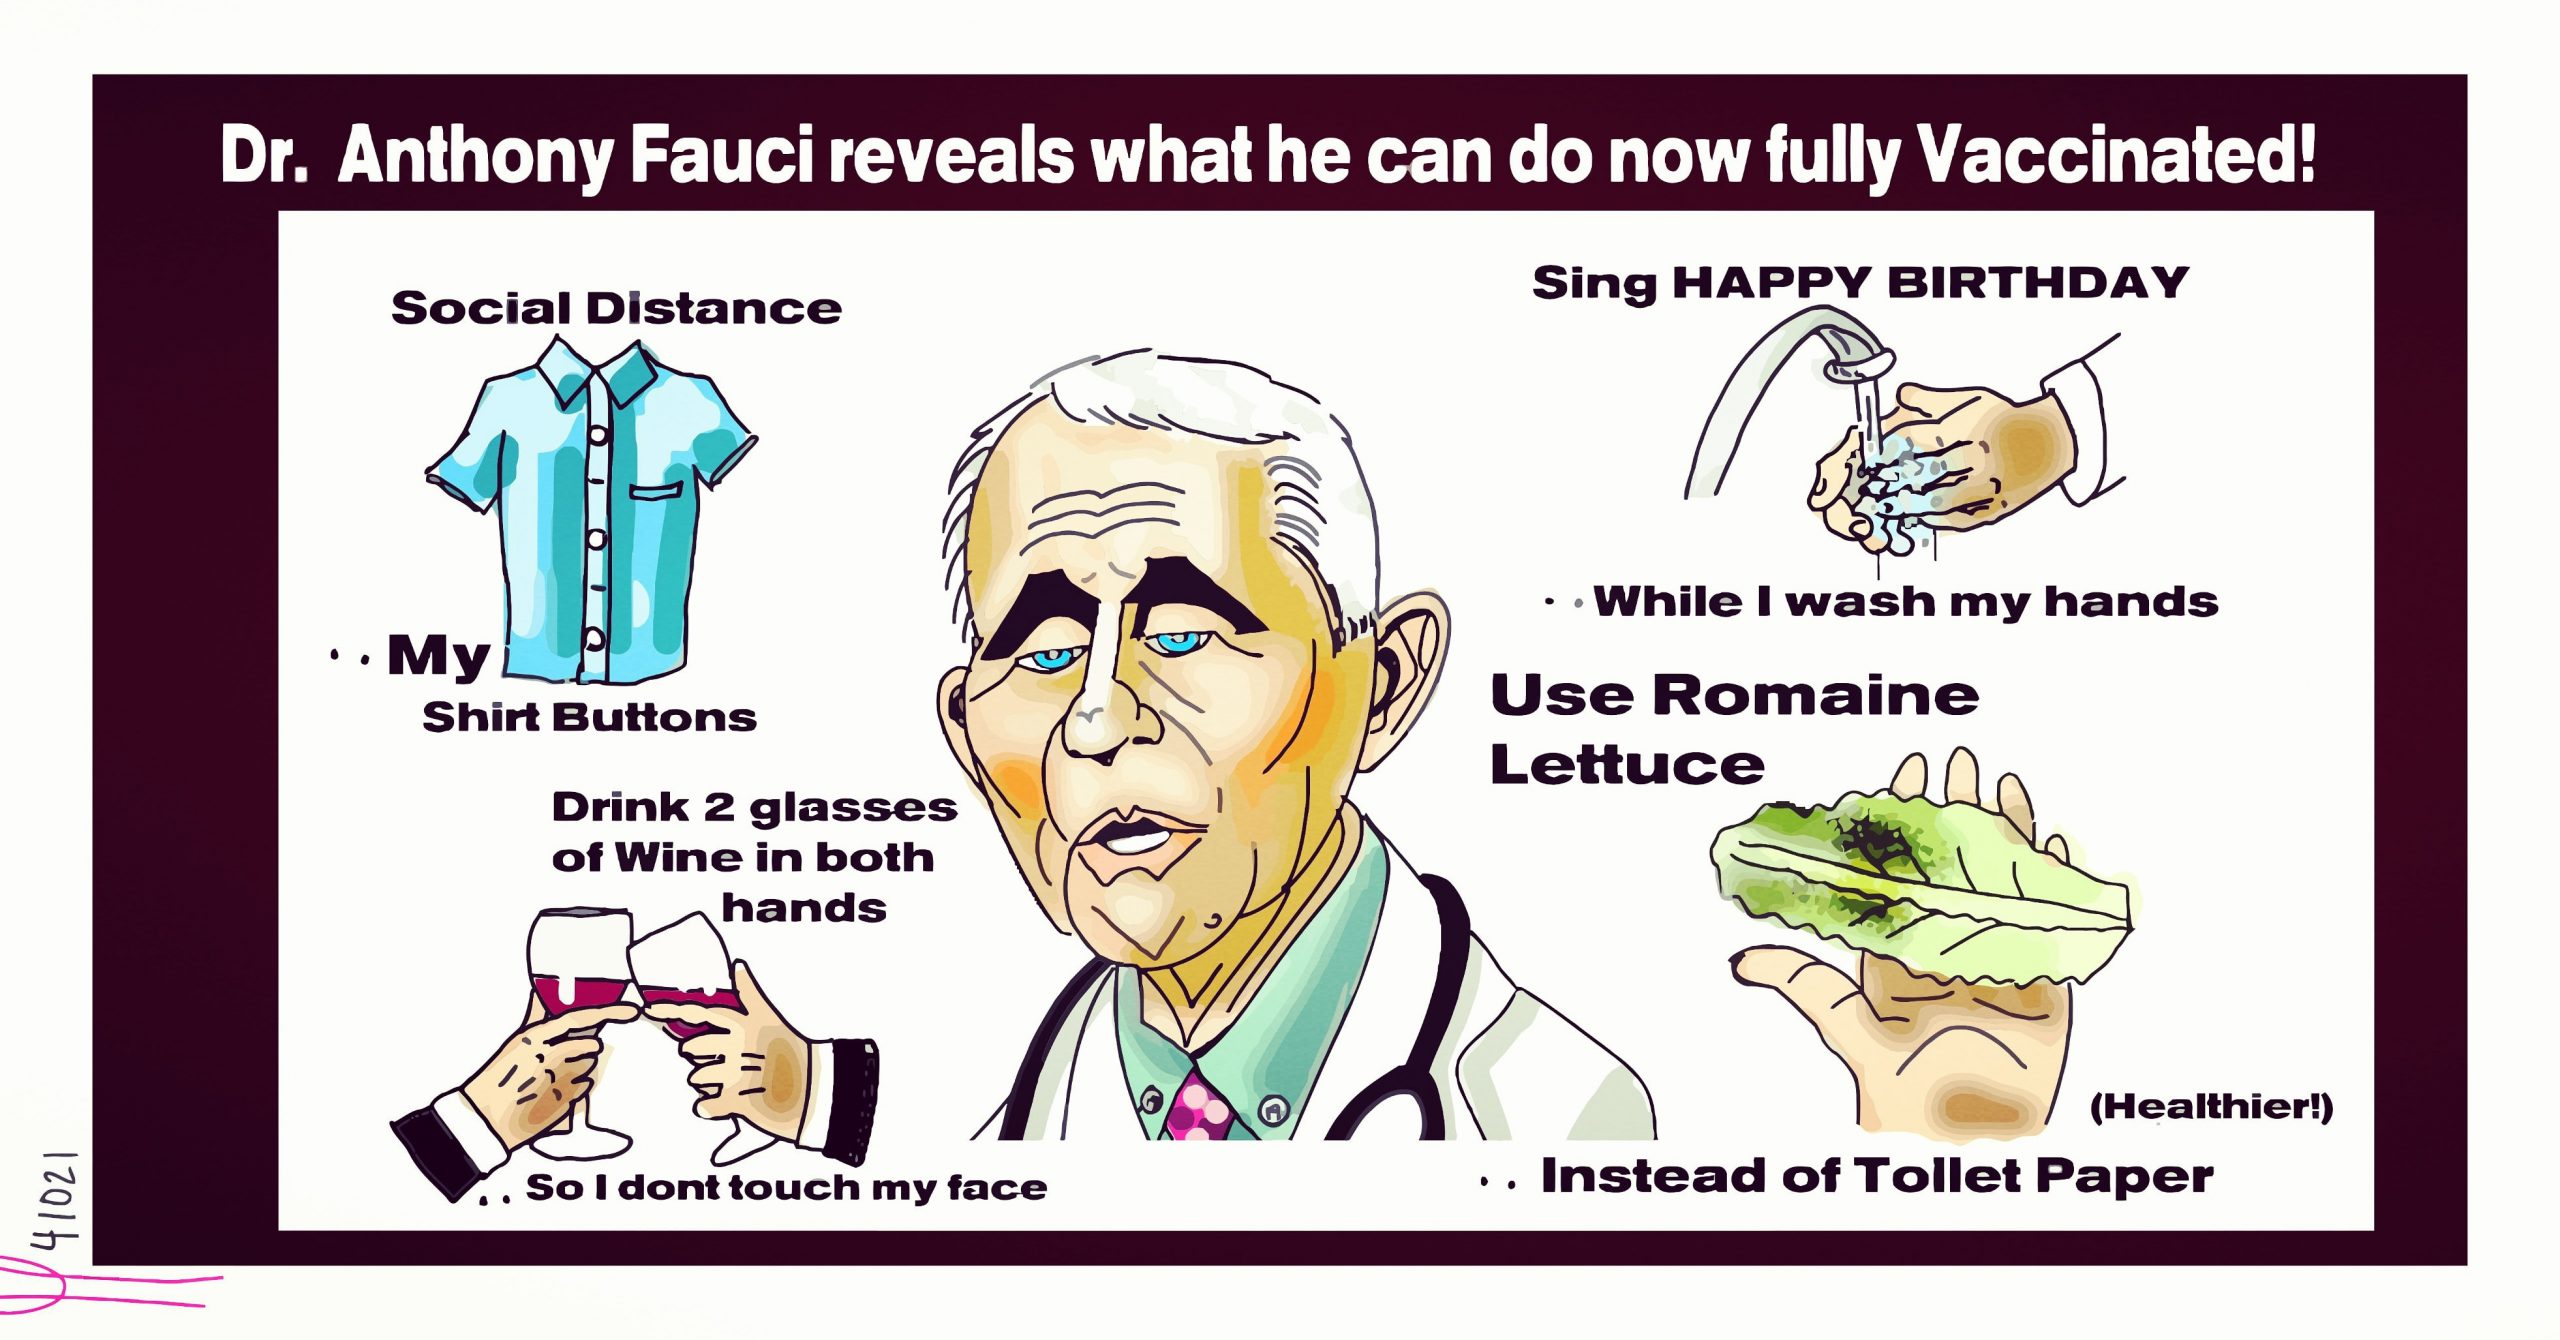 Dr. Anthony Fauci political editorial cartoon cartoonist for president Trump  fully vaccinated #anthonyfauci #fauci #fauciouchie #politicalcartoon #editorialcartoon post thumbnail image